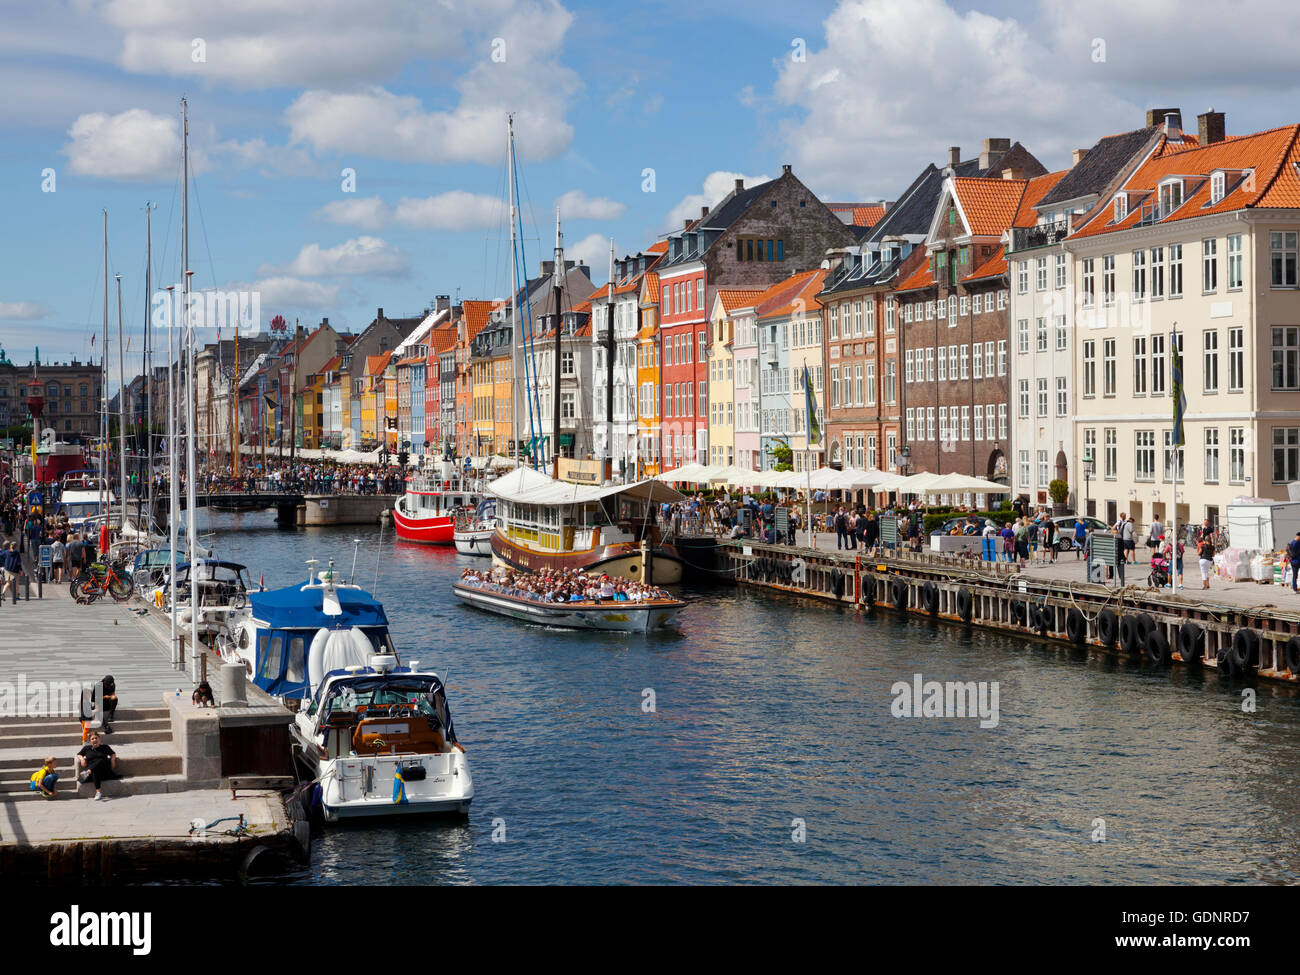 The waterway entrance and view into the Nyhavn canal in Copenhagen harbour. Stock Photo